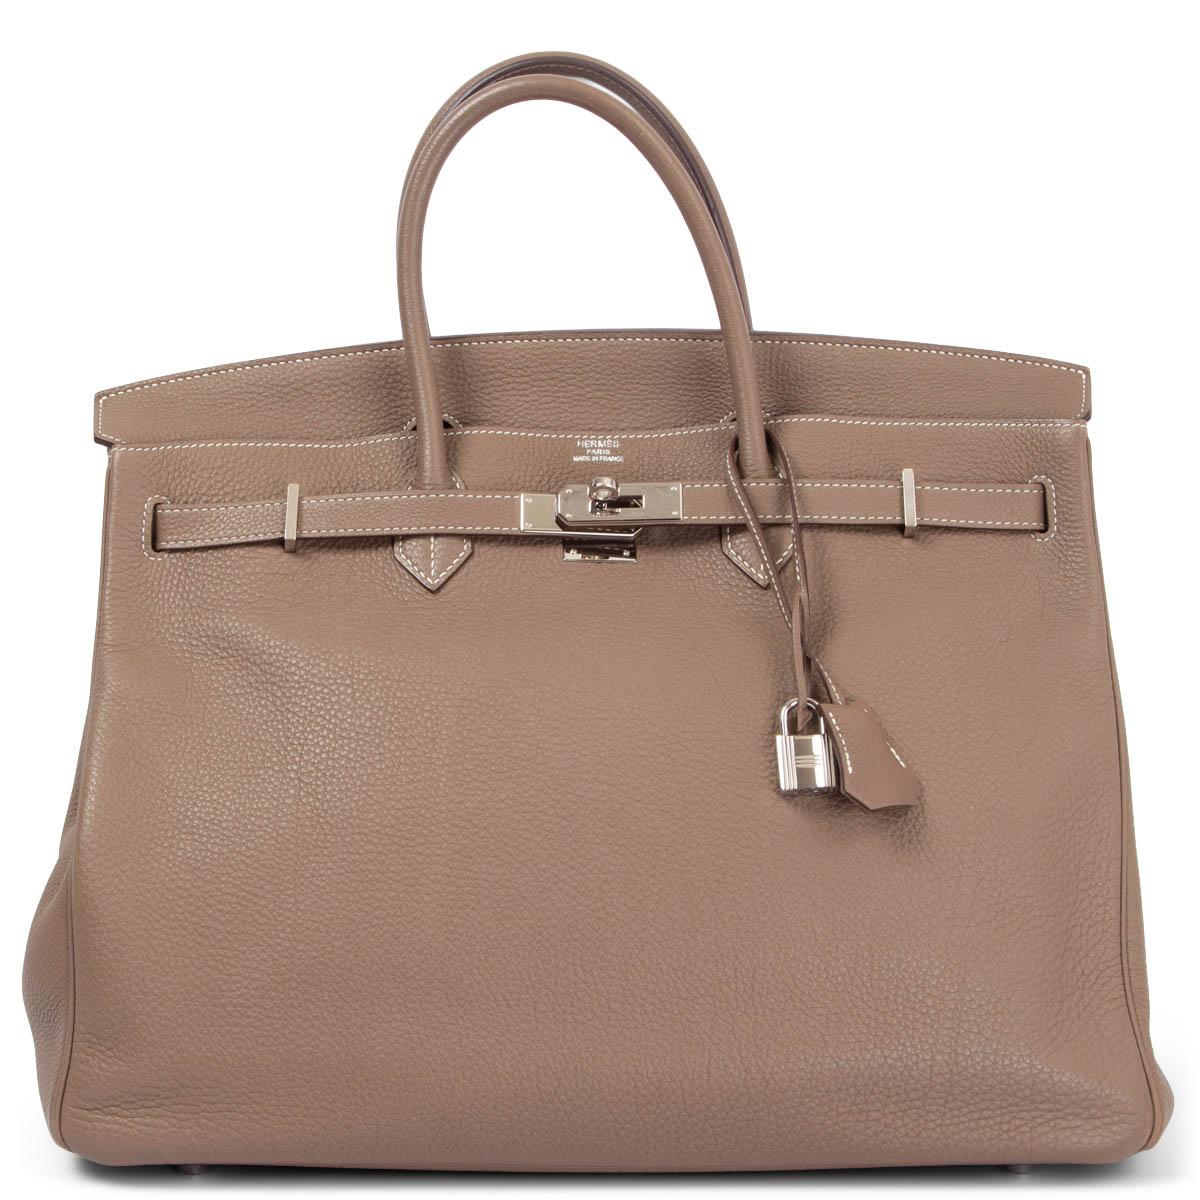 Women's HERMES Etoupe taupe Togo leather BIRKIN 40 Bag Phw For Sale